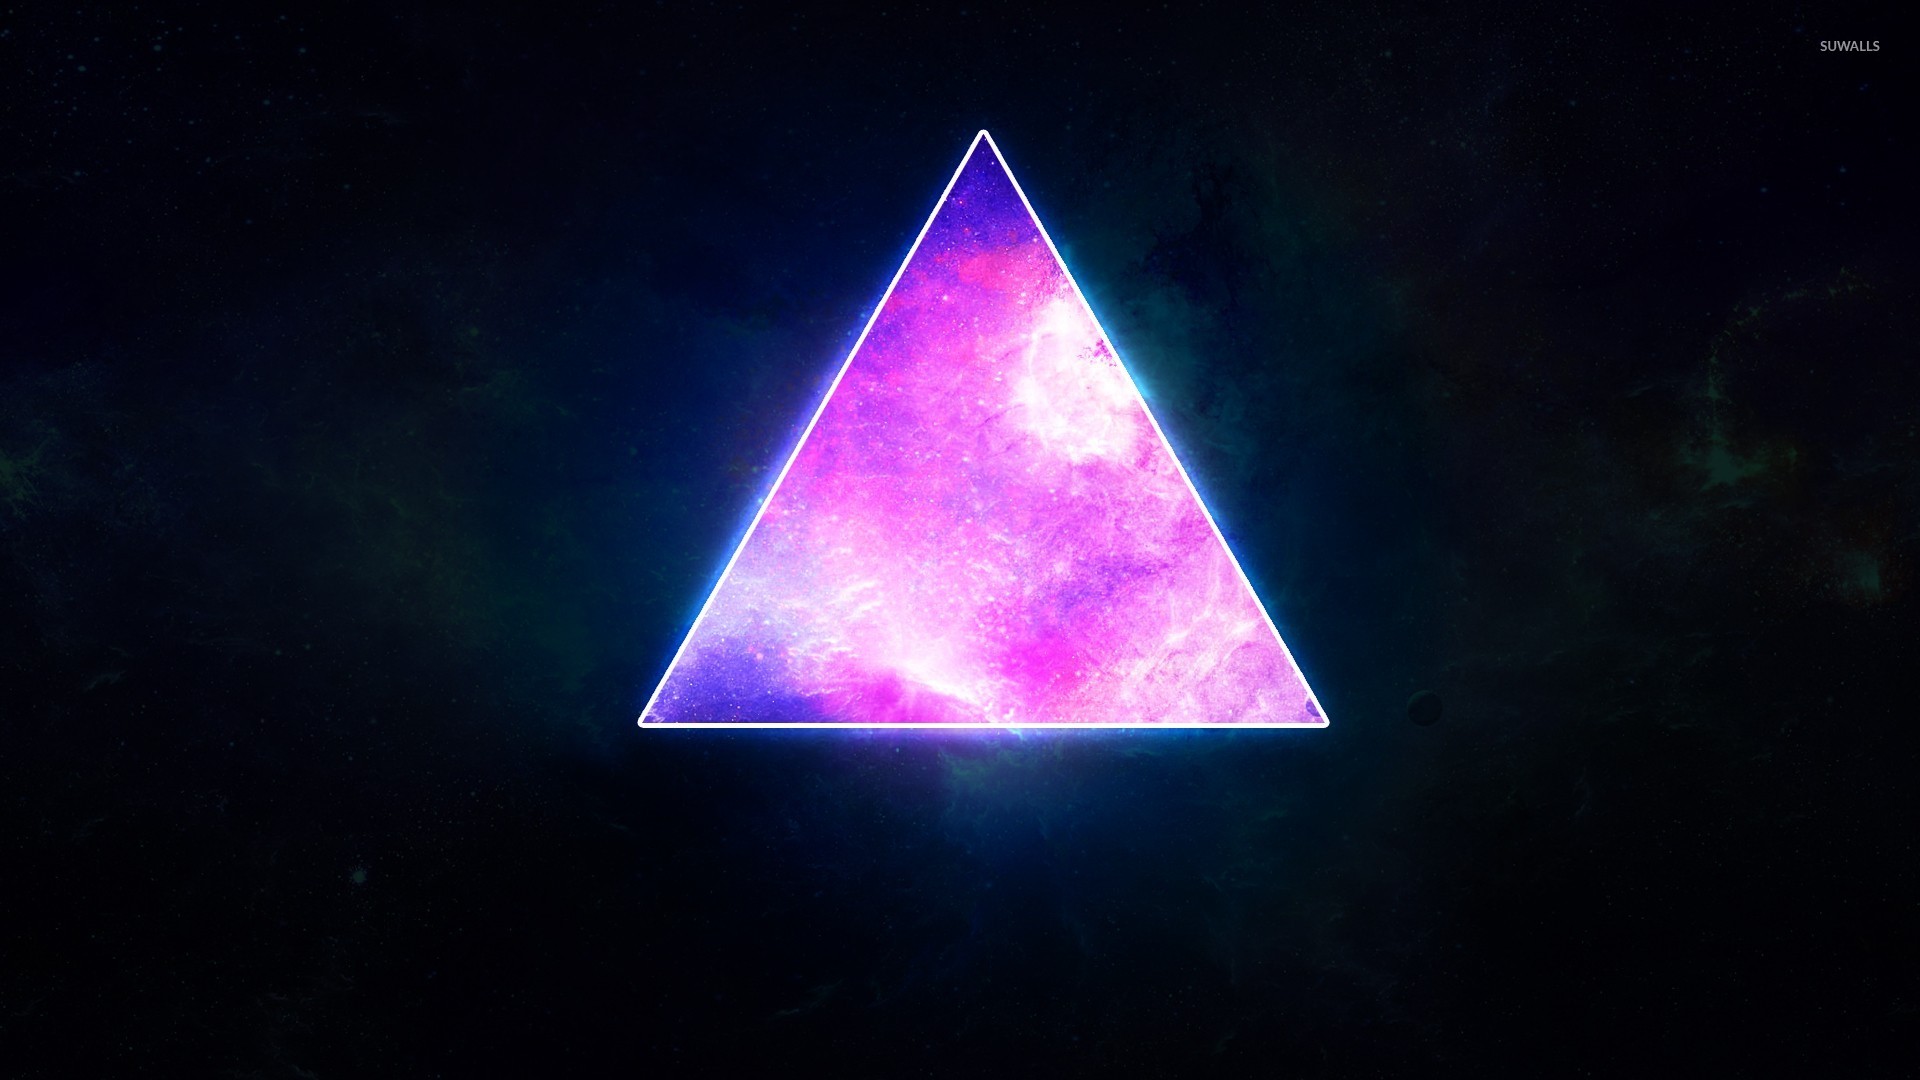 Cosmic Triangle Wallpaper Abstract Wallpapers 26752 HD Wallpapers Download Free Map Images Wallpaper [wallpaper376.blogspot.com]